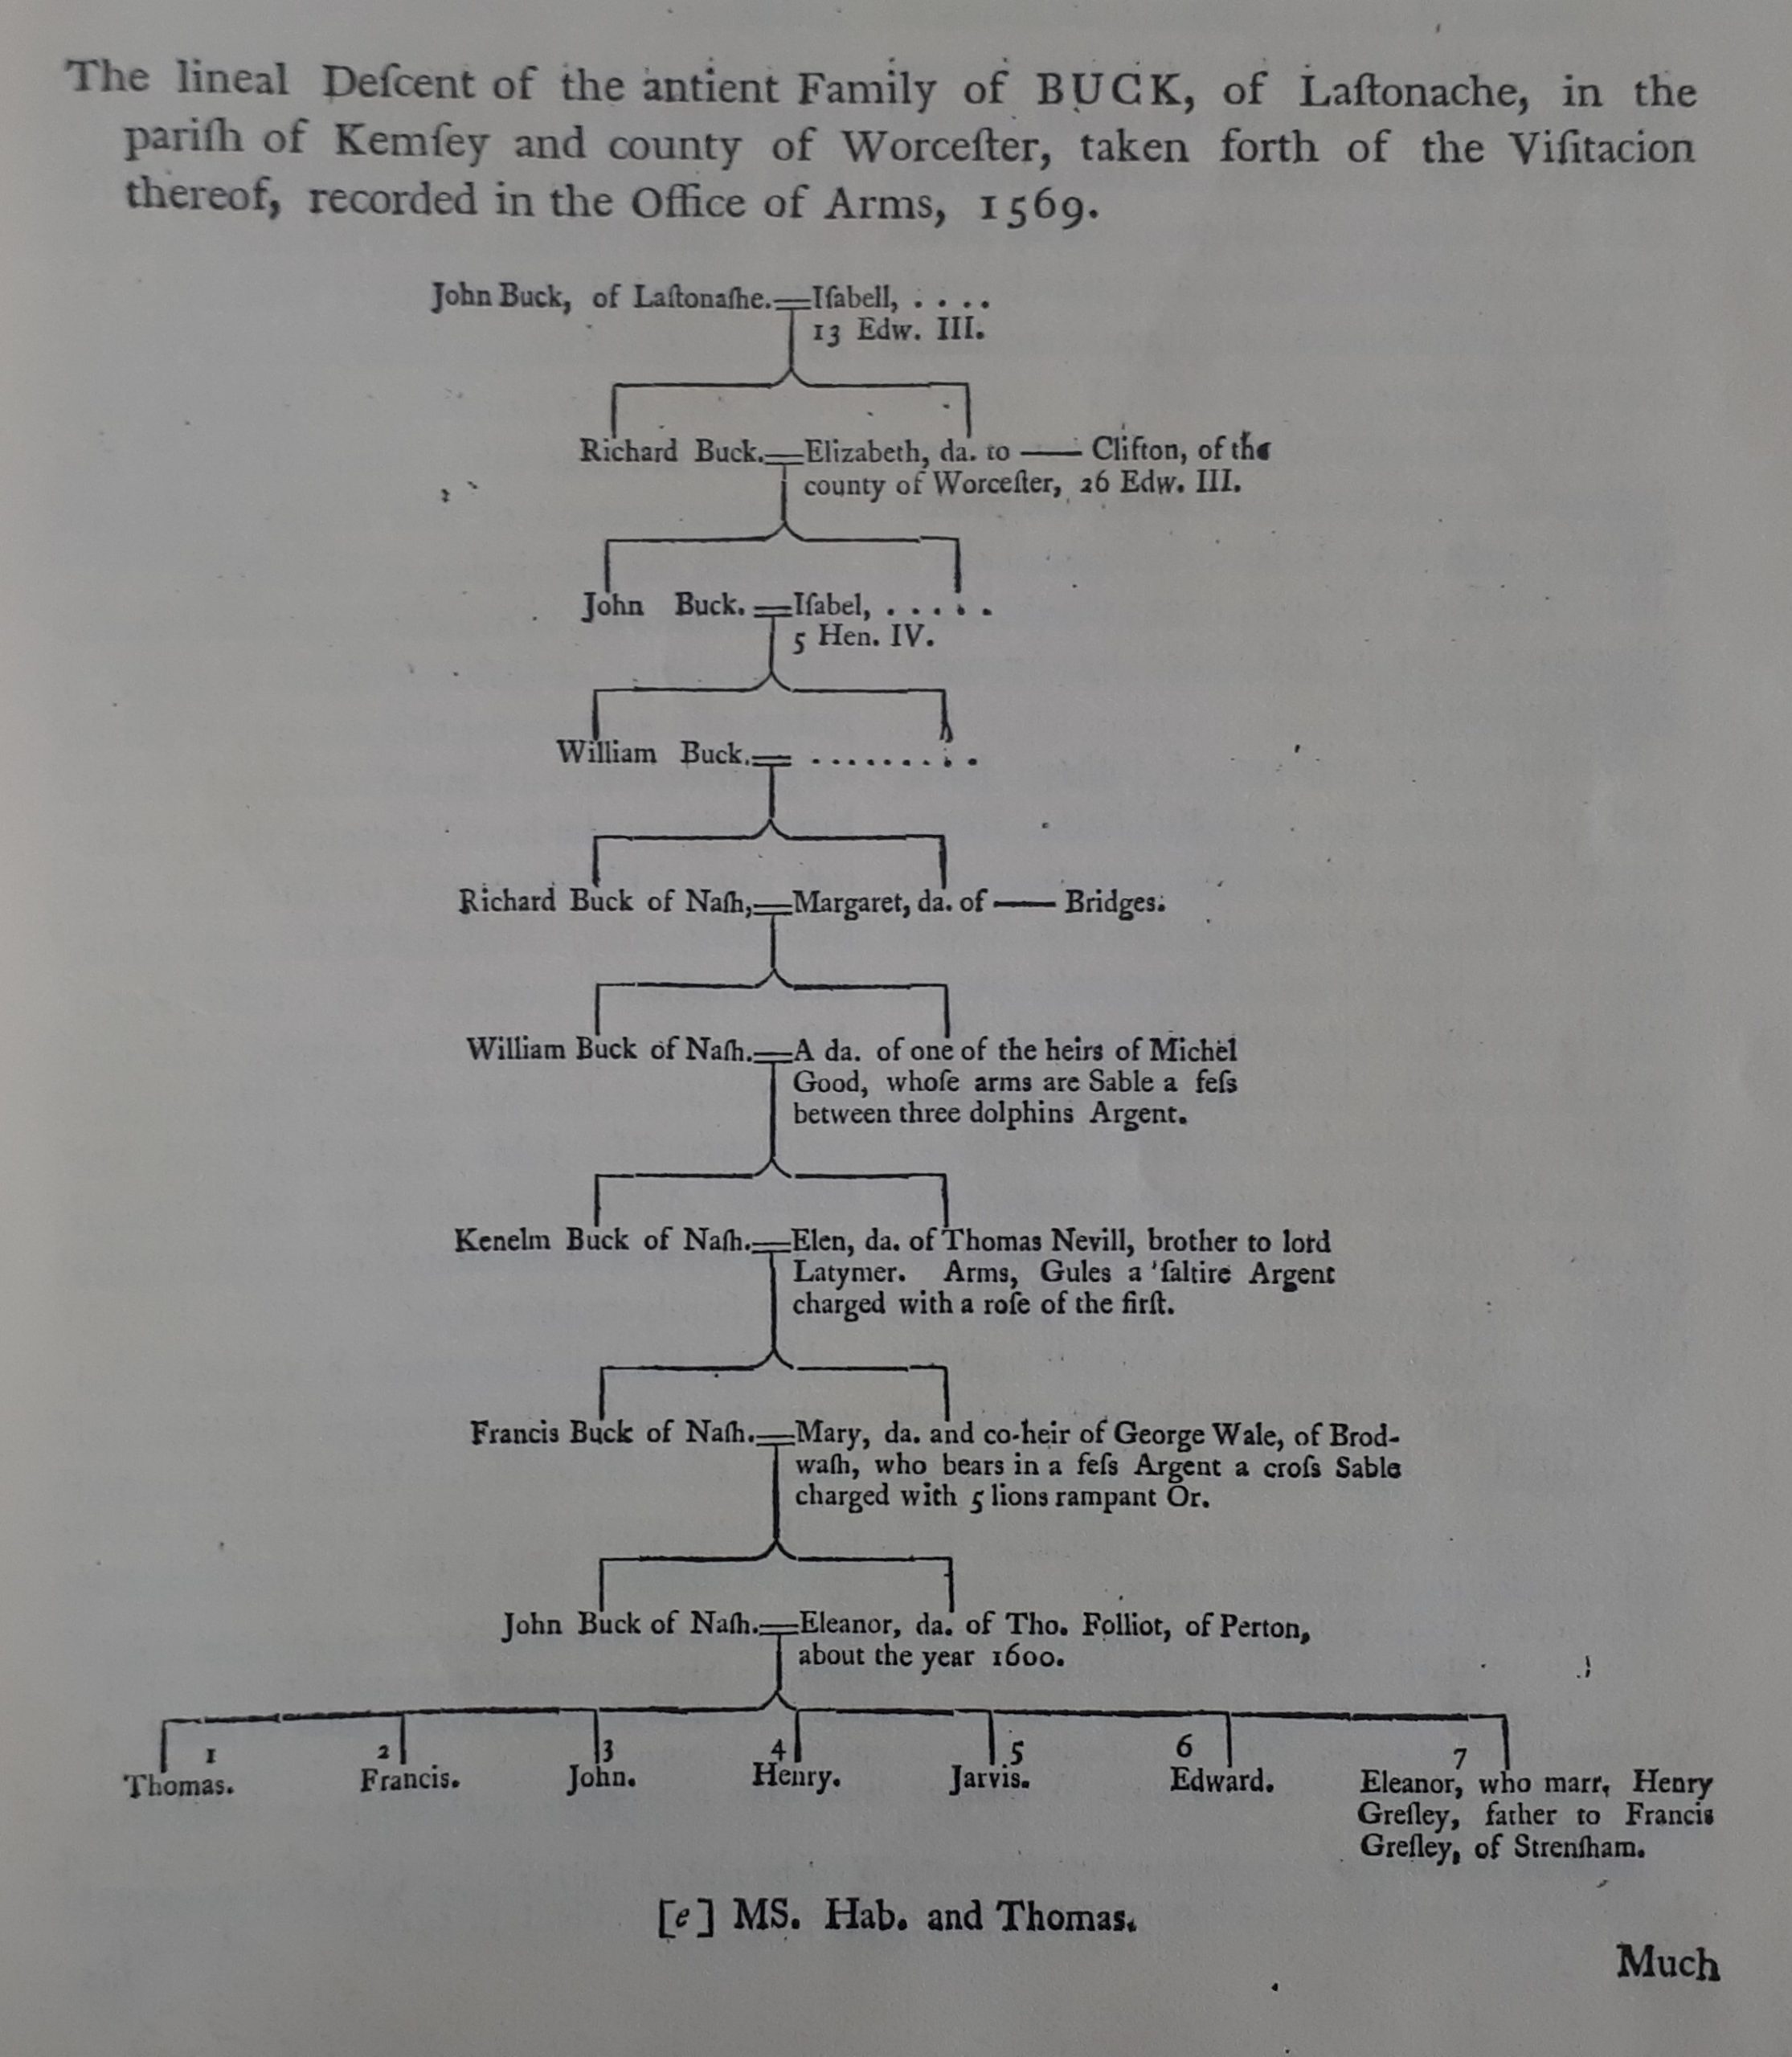 Pedigree of Sir John Buck from the Visitation of Worcester (1569) in Nash, 1799, Pt. II pg.19 